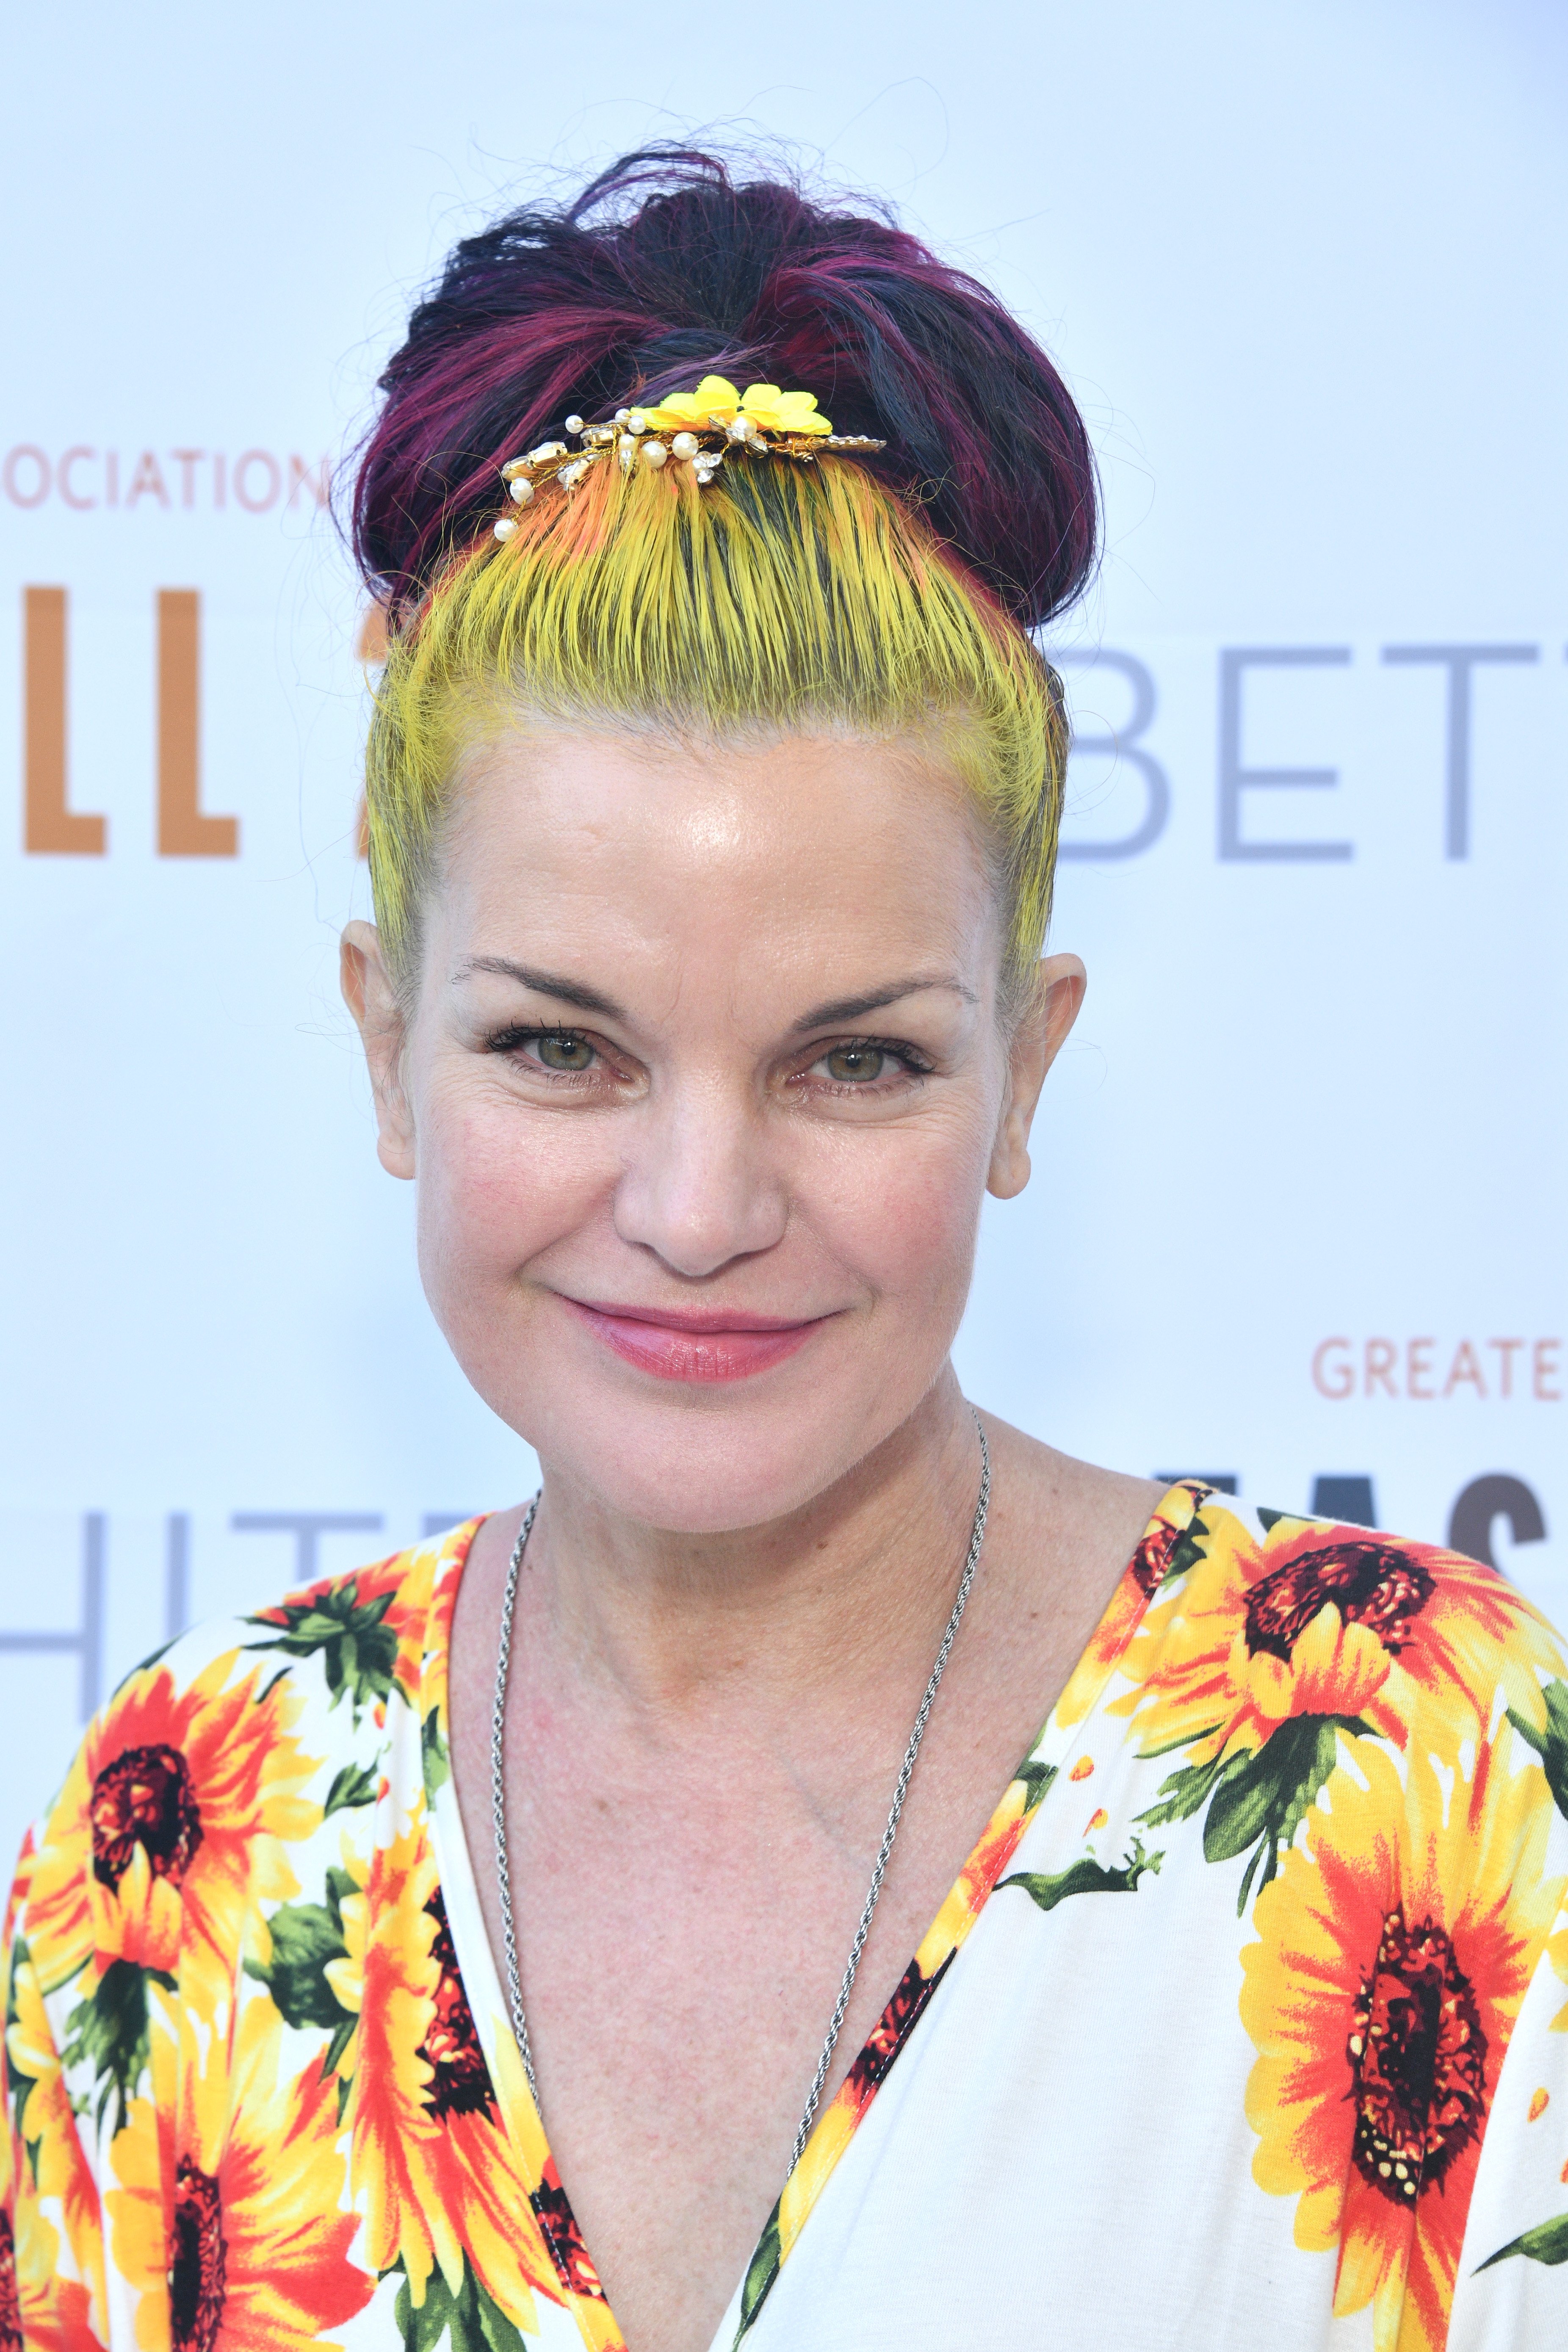 Pauley Perrette attends the Greater Los Angeles Zoo Association's (GLAZA) Beastly Ball at Los Angeles Zoo on June 04, 2022, in Los Angeles, California. | Source: Getty Images